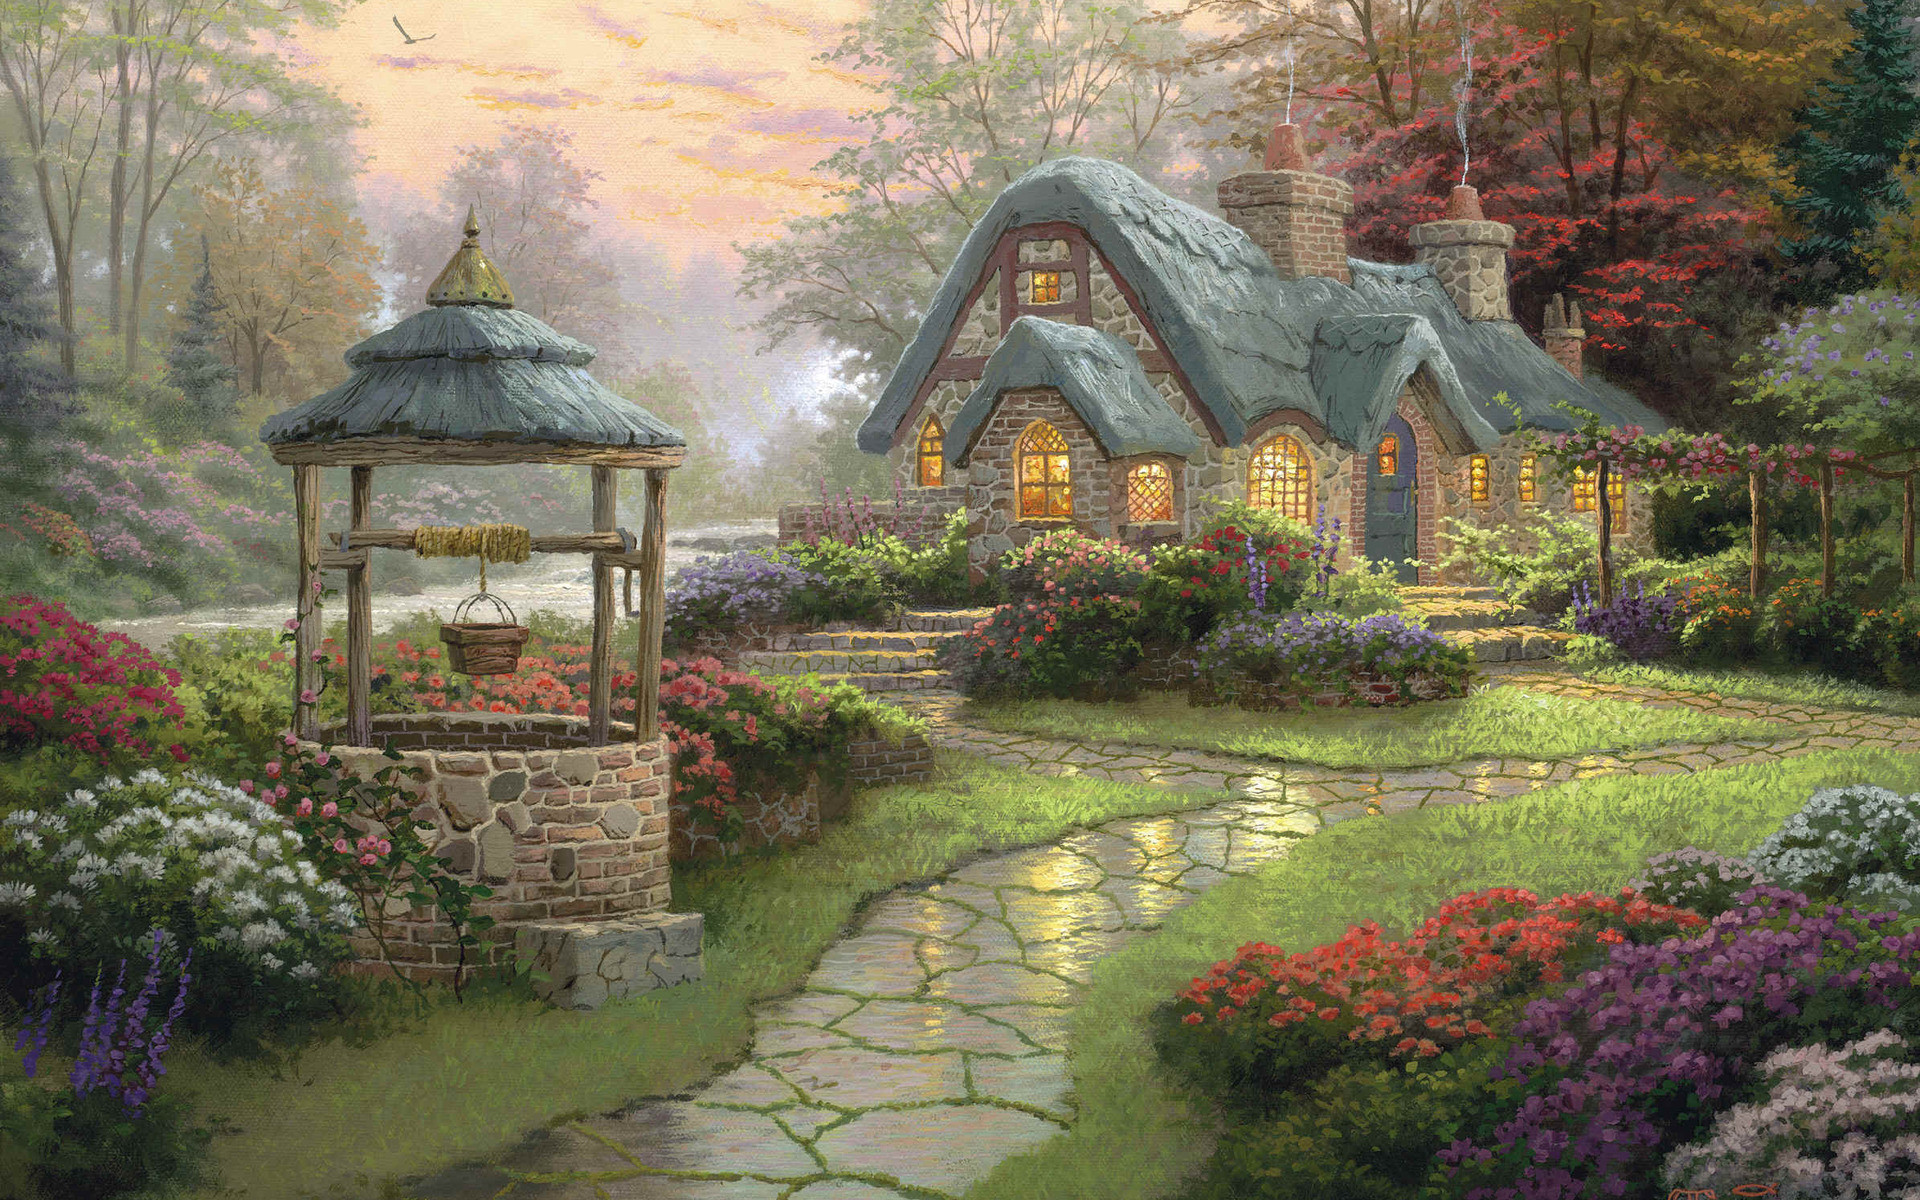 1920x1200 Thomas Kinkade HD Wallpaper - HD Wallpapers Backgrounds of Your Choice